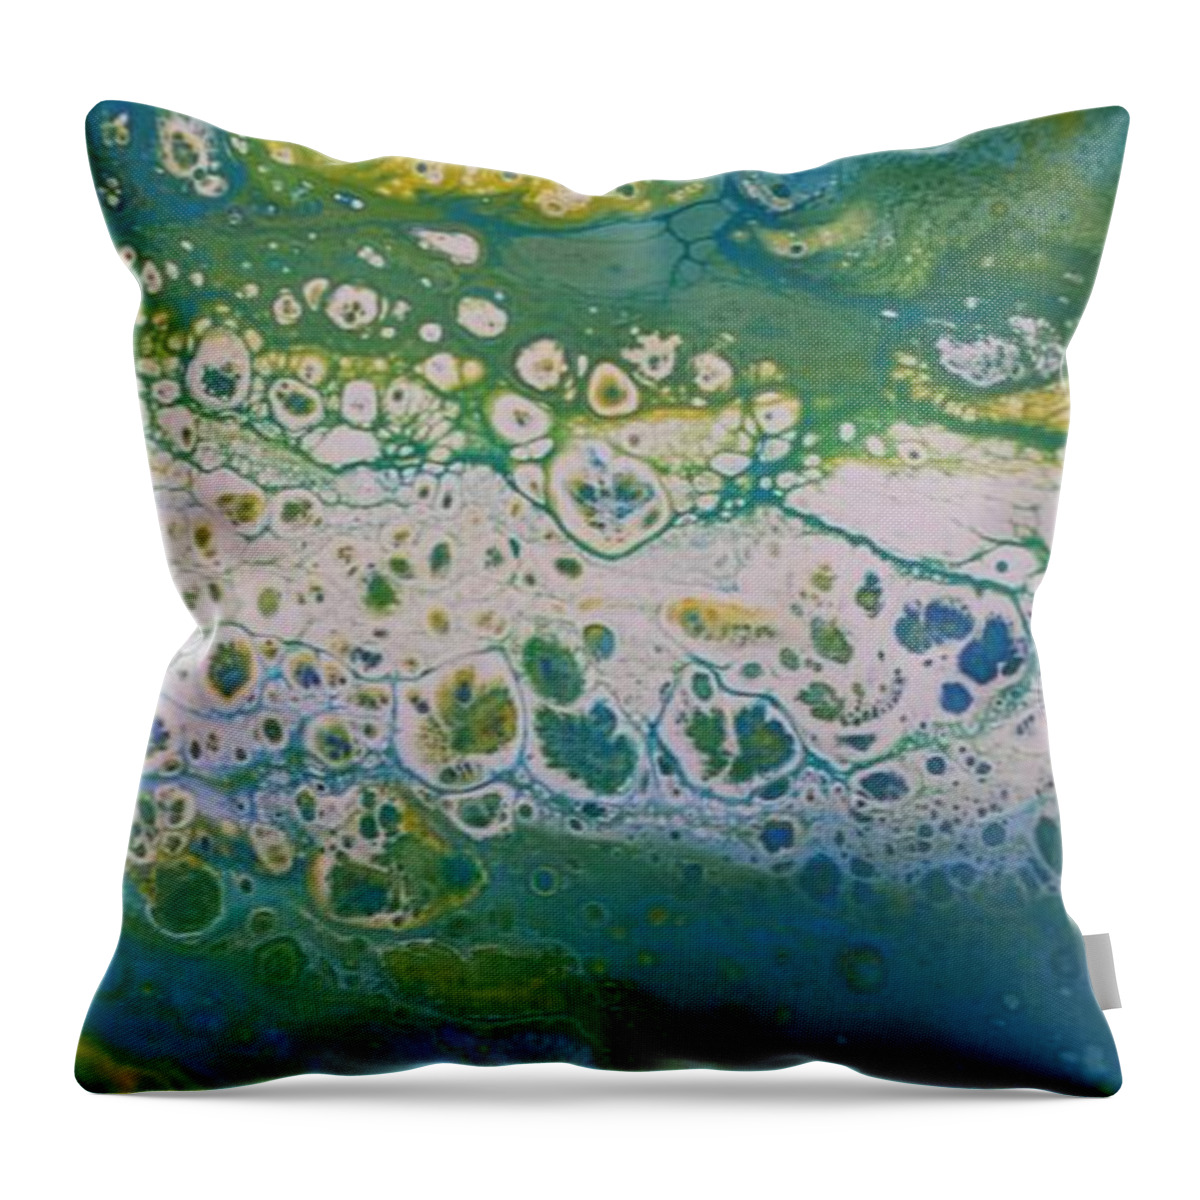 Acrylic Throw Pillow featuring the painting White Flow by Betsy Carlson Cross